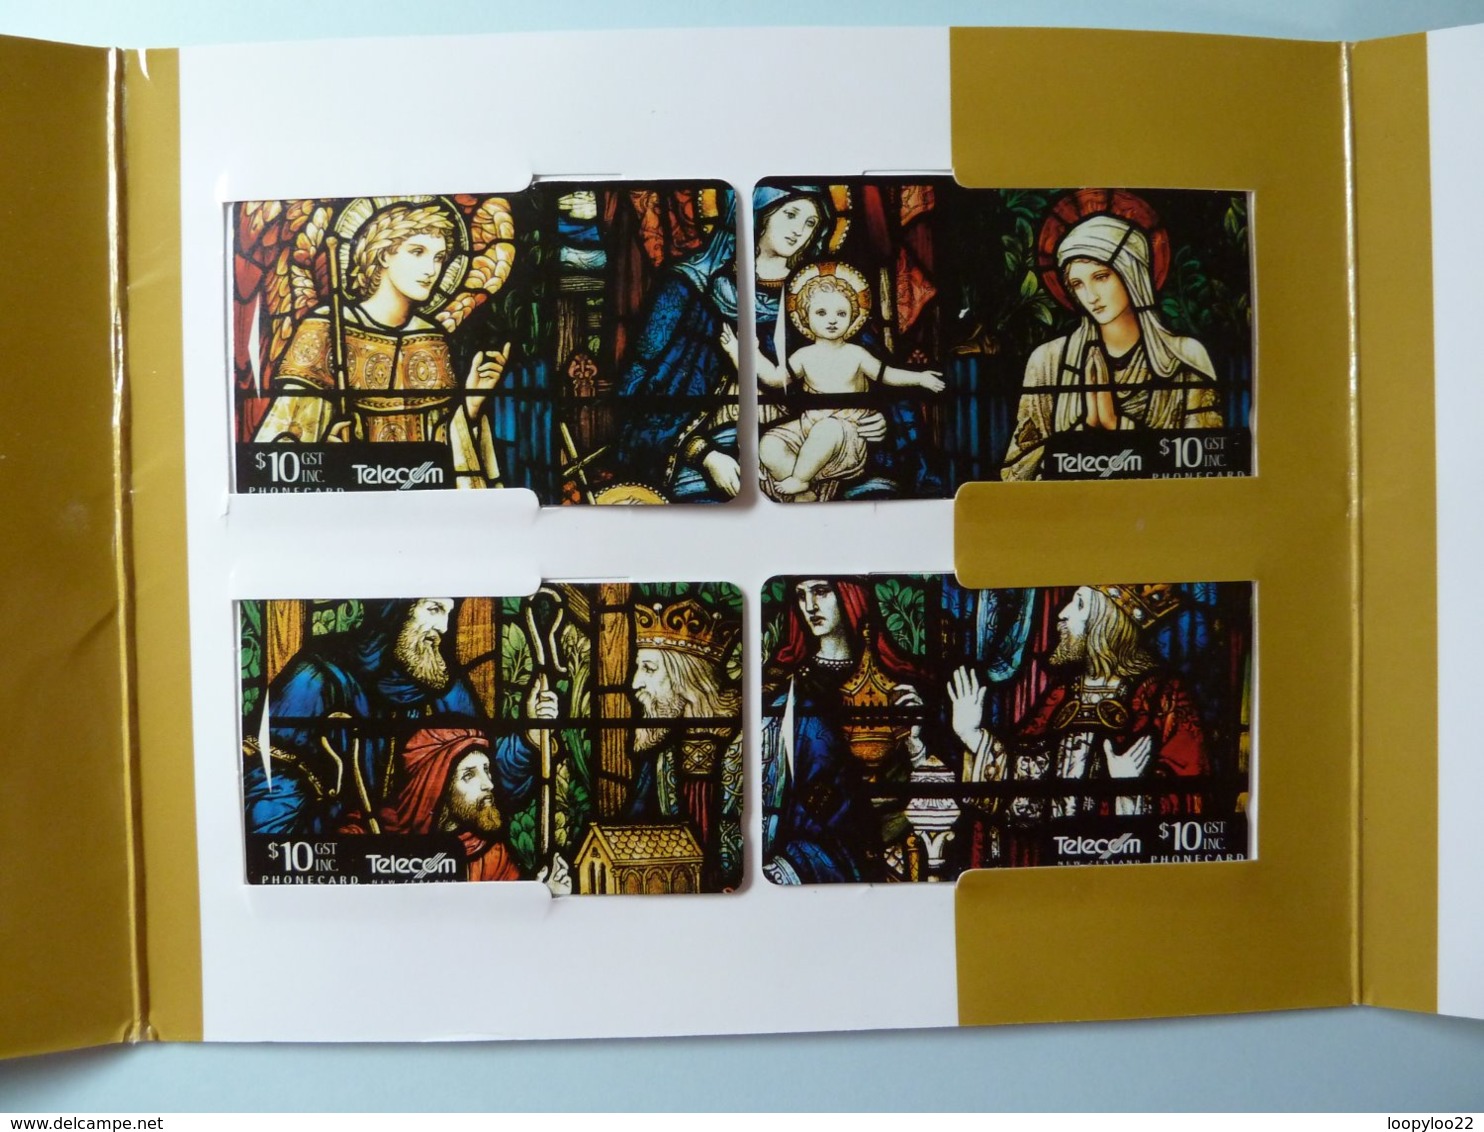 New Zealand - GPT - Stained Glass Windows - Phonecard & Stamp - Limited Edition 3000ex & Certificate - Mint In Folder - Nueva Zelanda